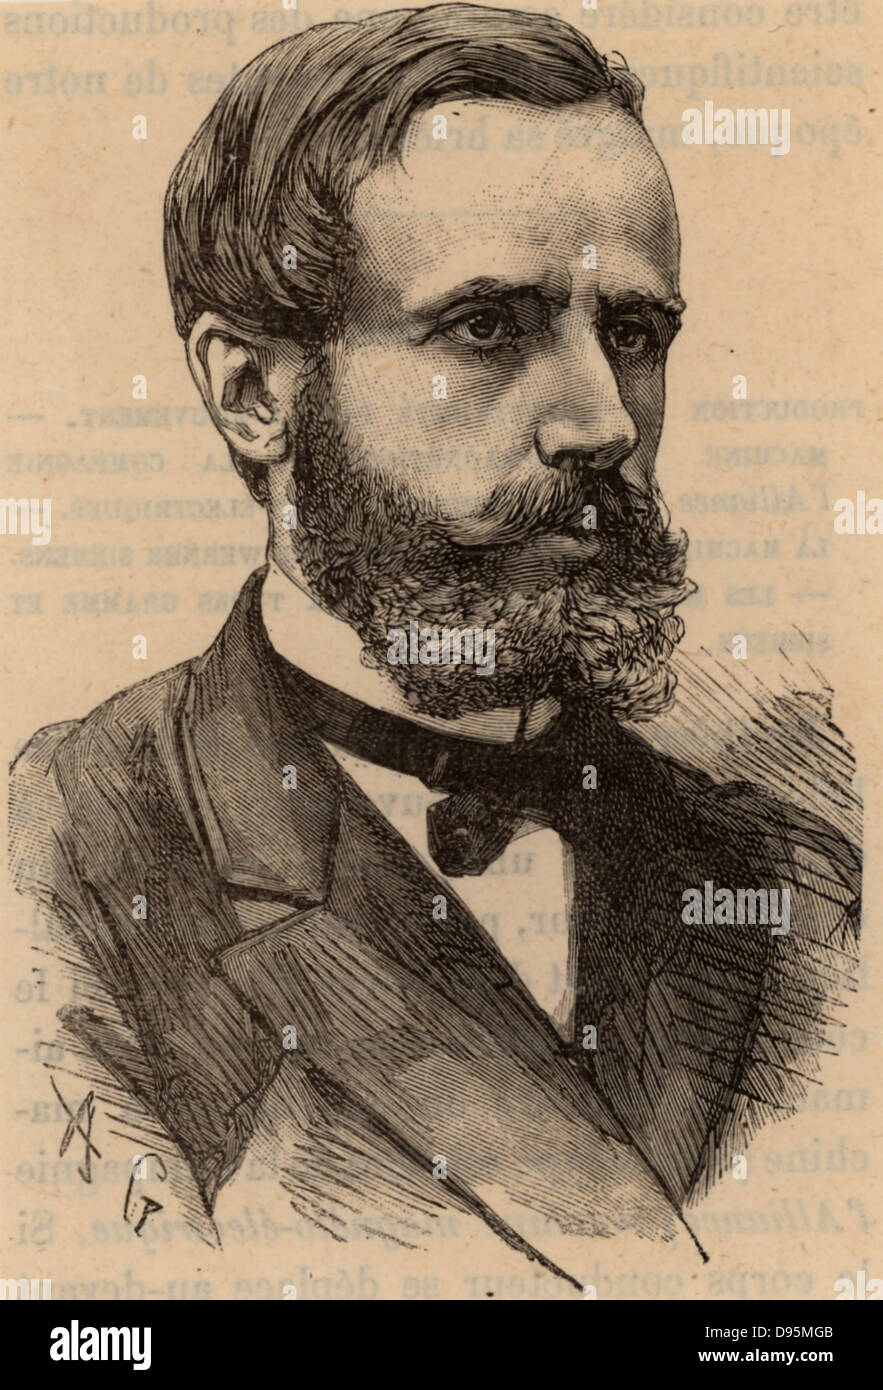 (Raymond) Gaston Plante (1834-1889) French physicist who in 1859 invented the first accumulator or electric storage battery.  It was a wet cell with two lead plates immersed in sulphuric acid, the electrolyte. Engraving from 'Les Merveilles de la Science' by Louis Figuier (Paris, c1870). Engraving. Stock Photo